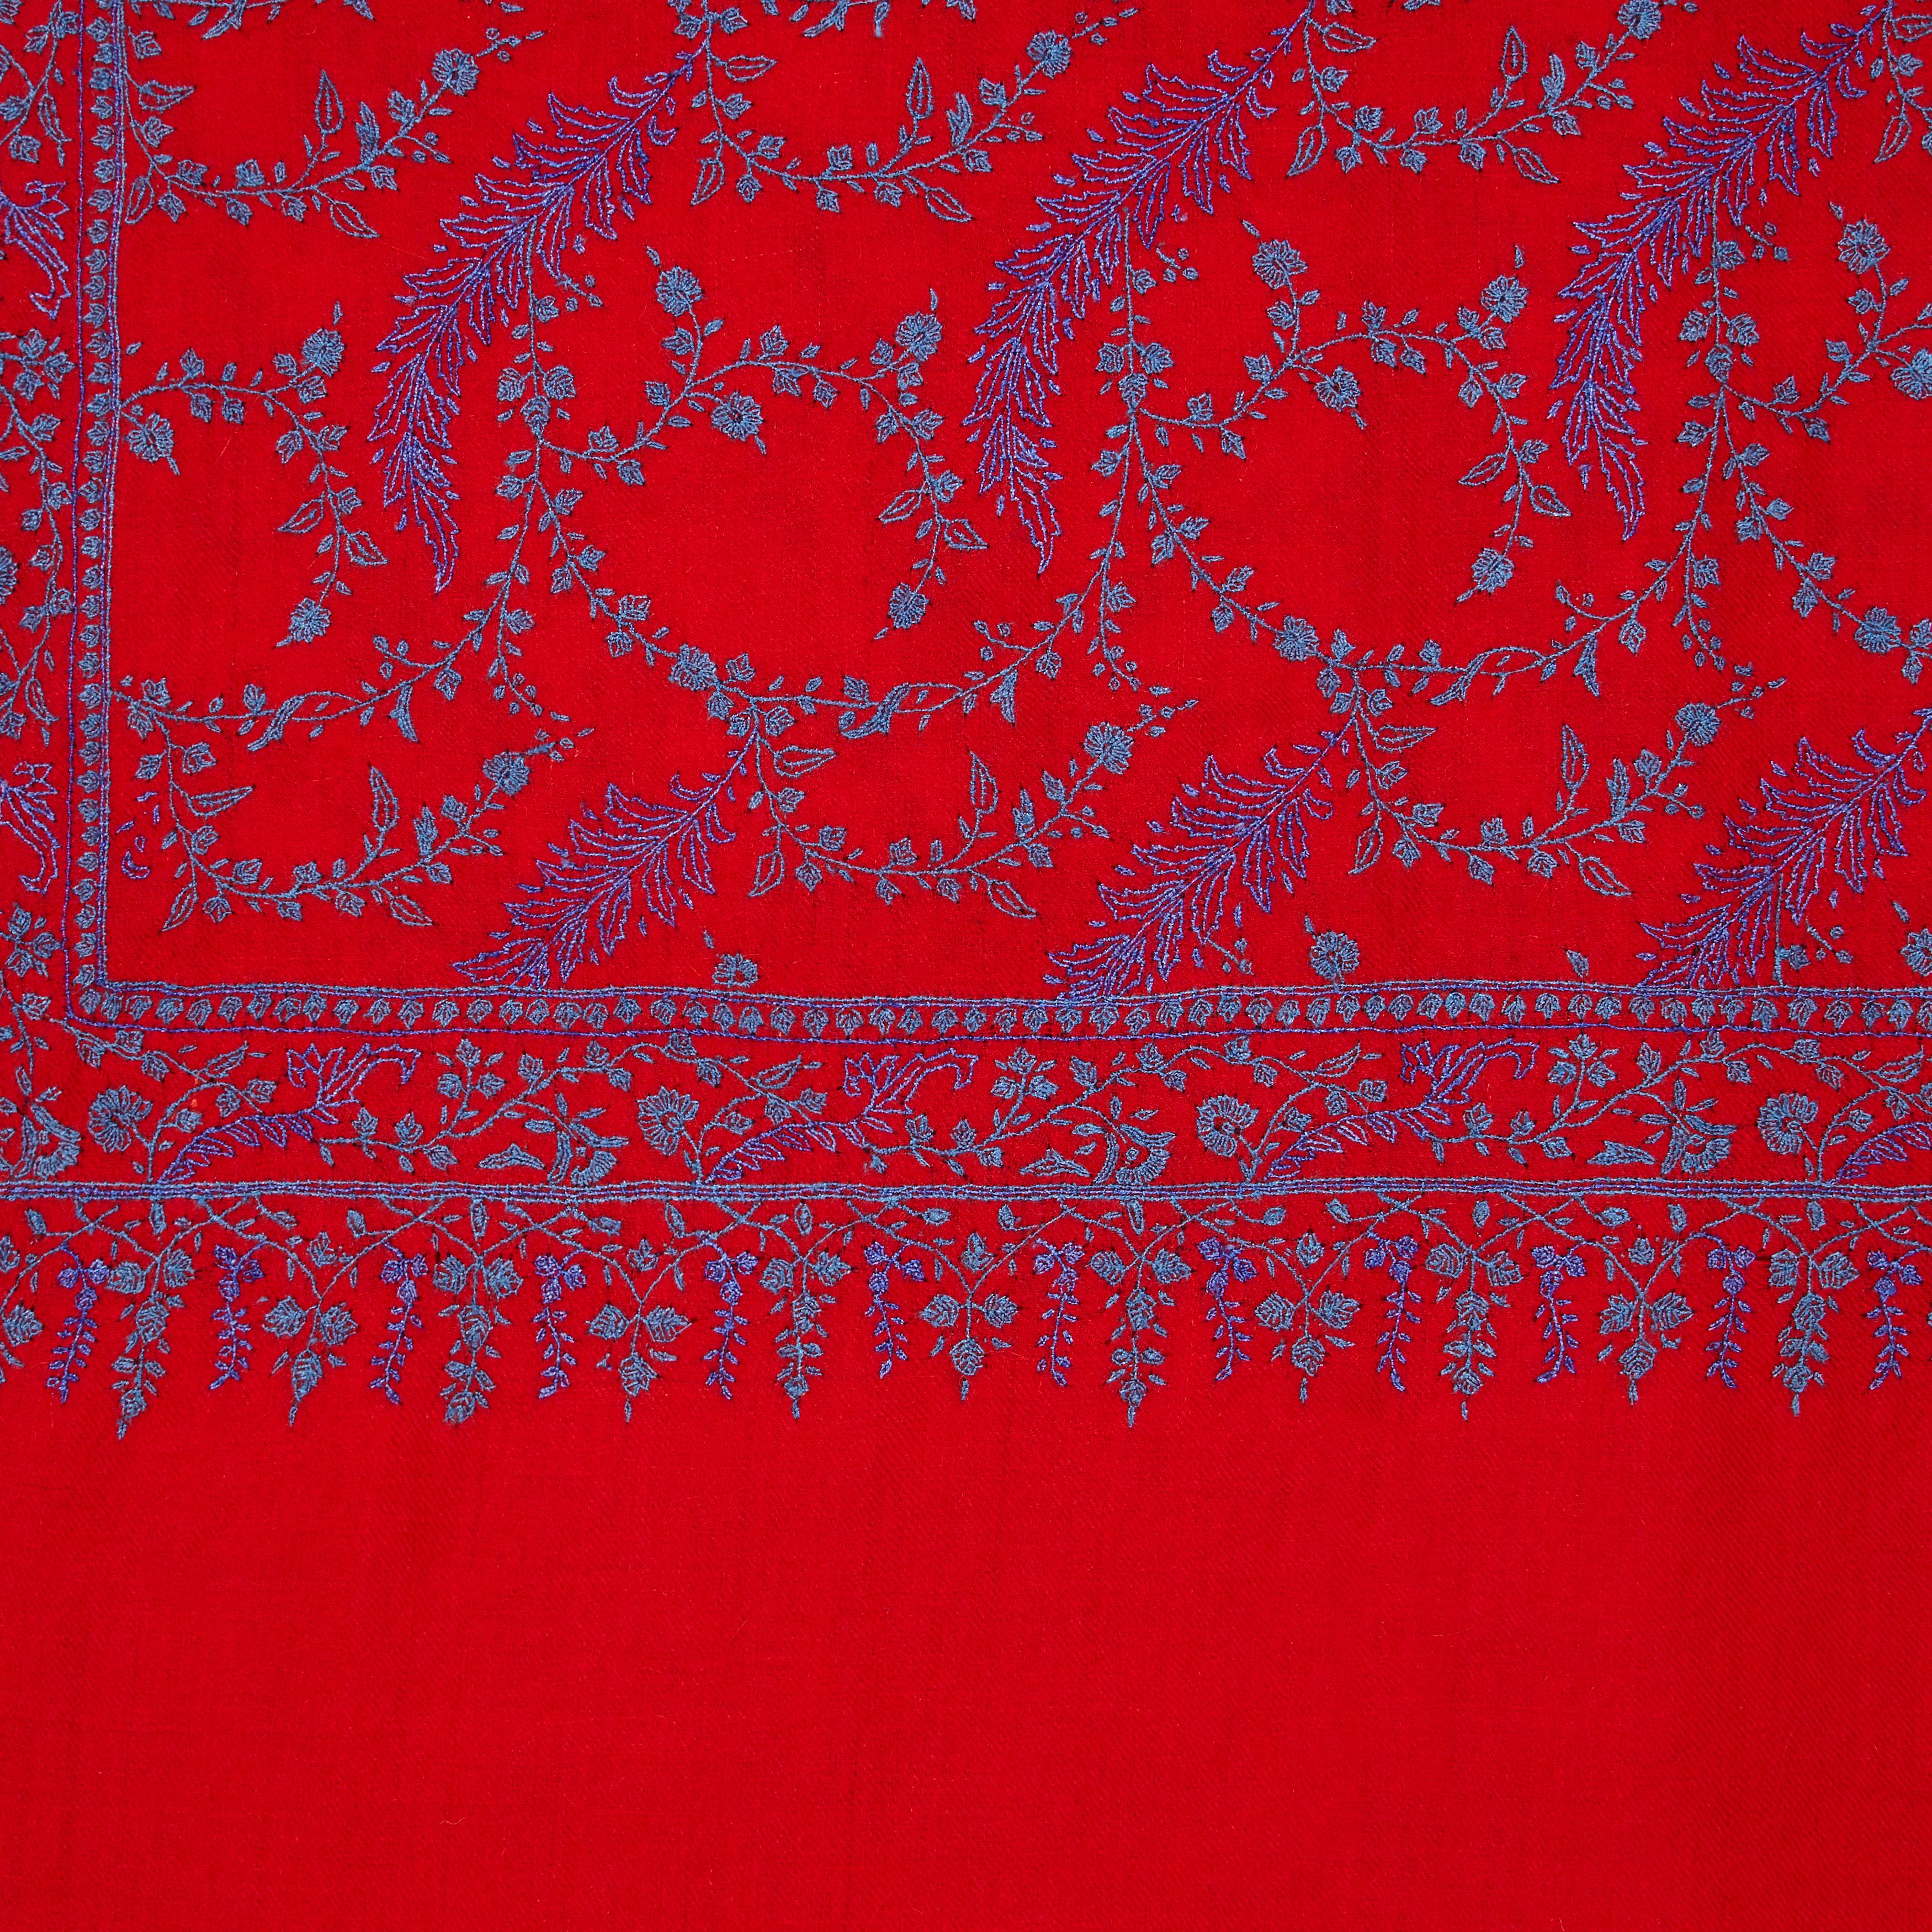 The perfect Christmas gift for someone special - this shawl is unique and handmade. 
Verheyen London’s shawl is spun from the finest embroidered woven cashmere from Kashmir.  The embroidery can take up to 1 year to embroider and each one is unique.